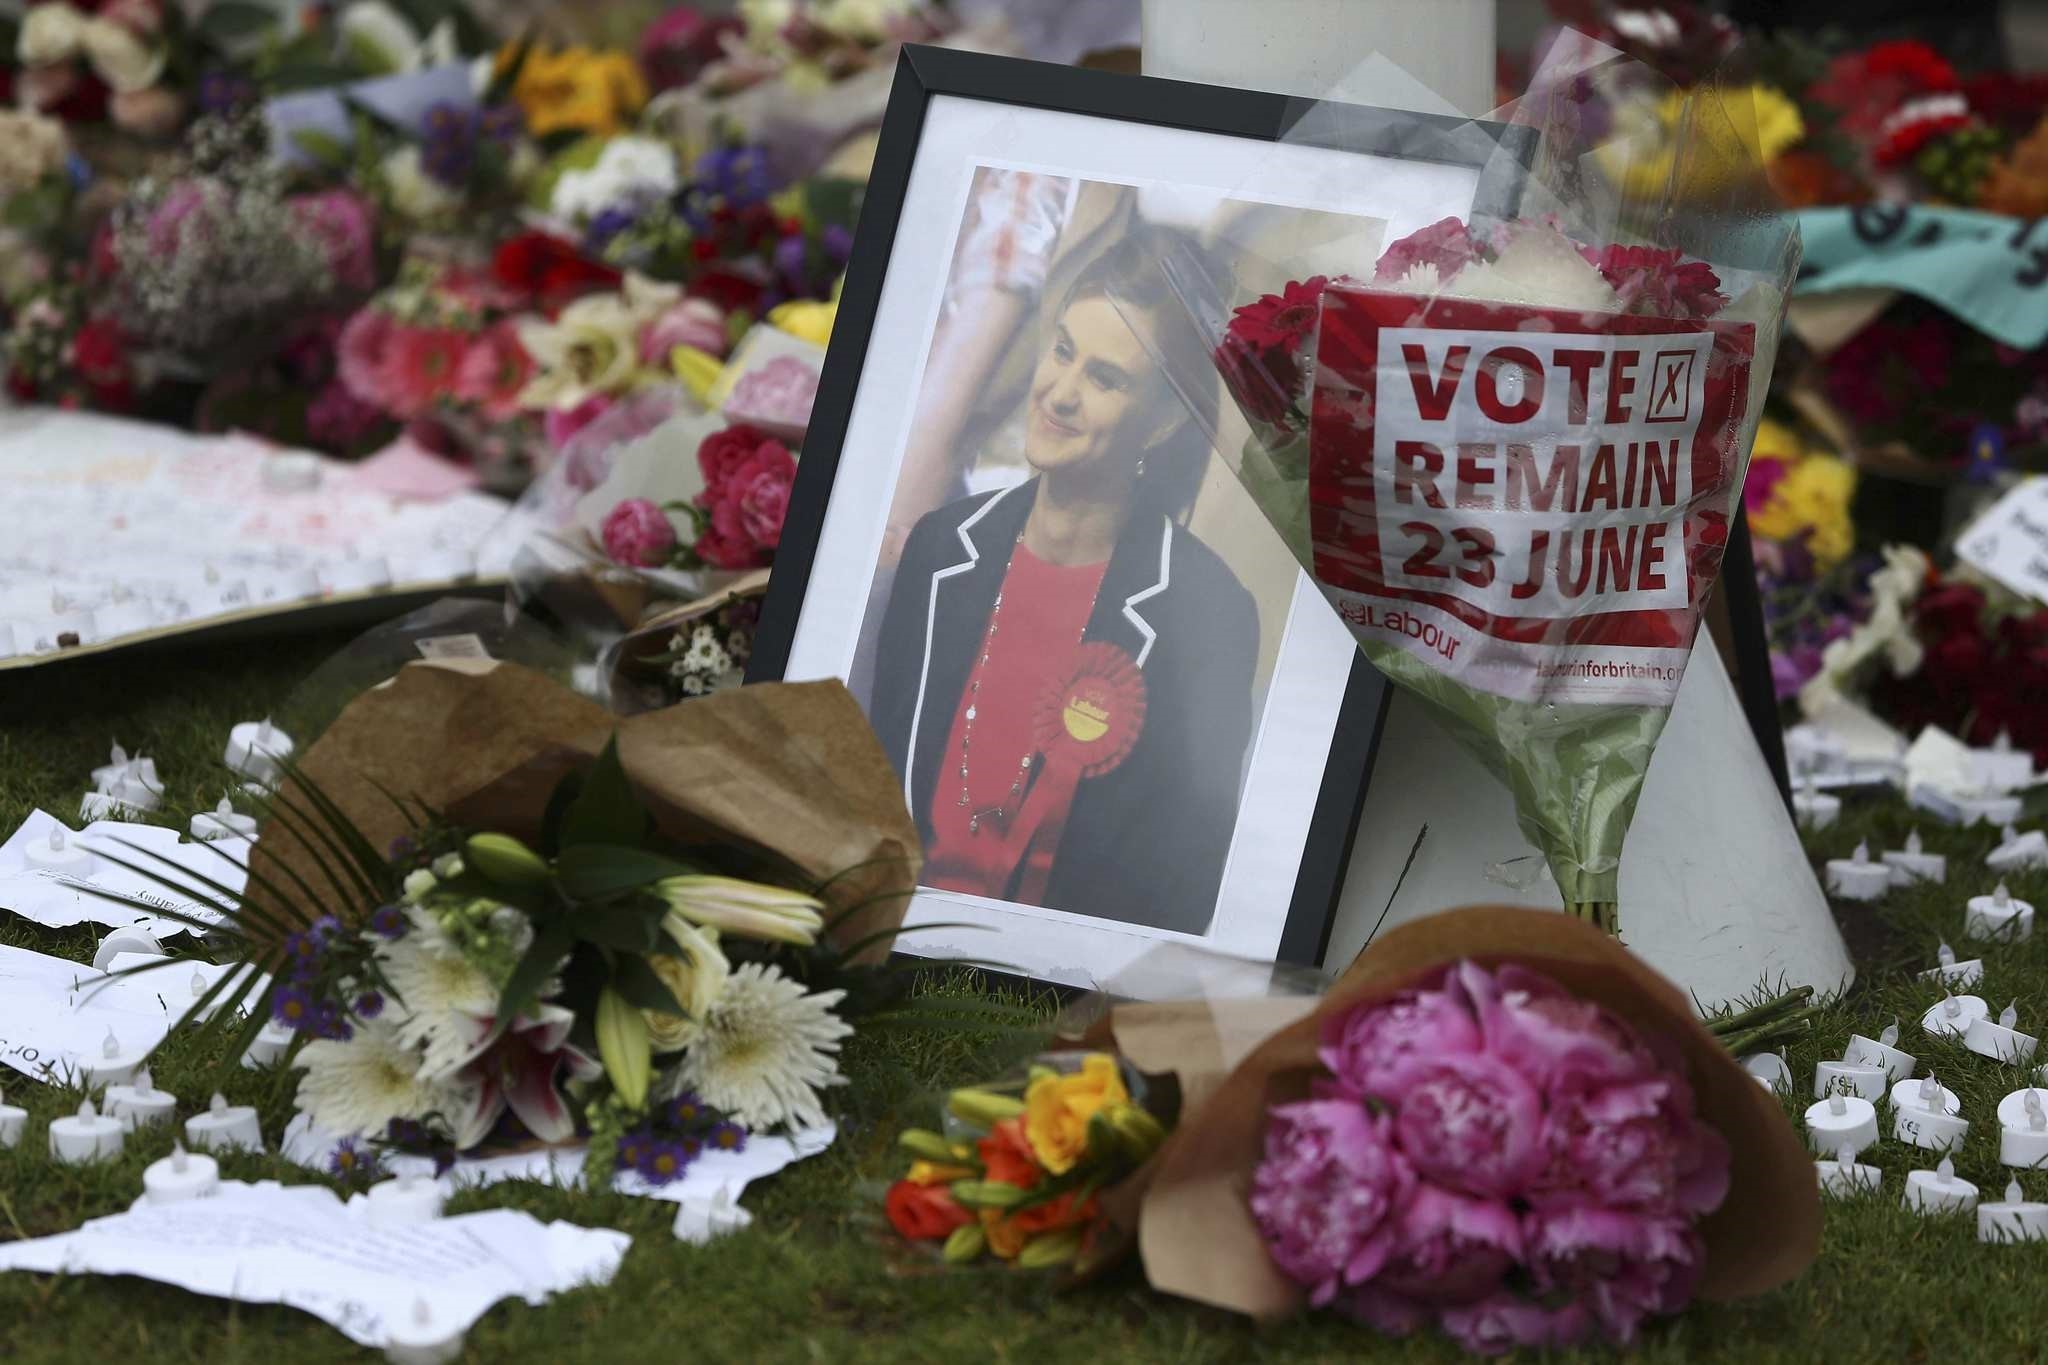 Tributes in memory of murdered Labour Party MP Jo Cox, who was shot dead in Birstall, are left at Parliament Square in London, Britain June 18, 2016. (REUTERS Photo)